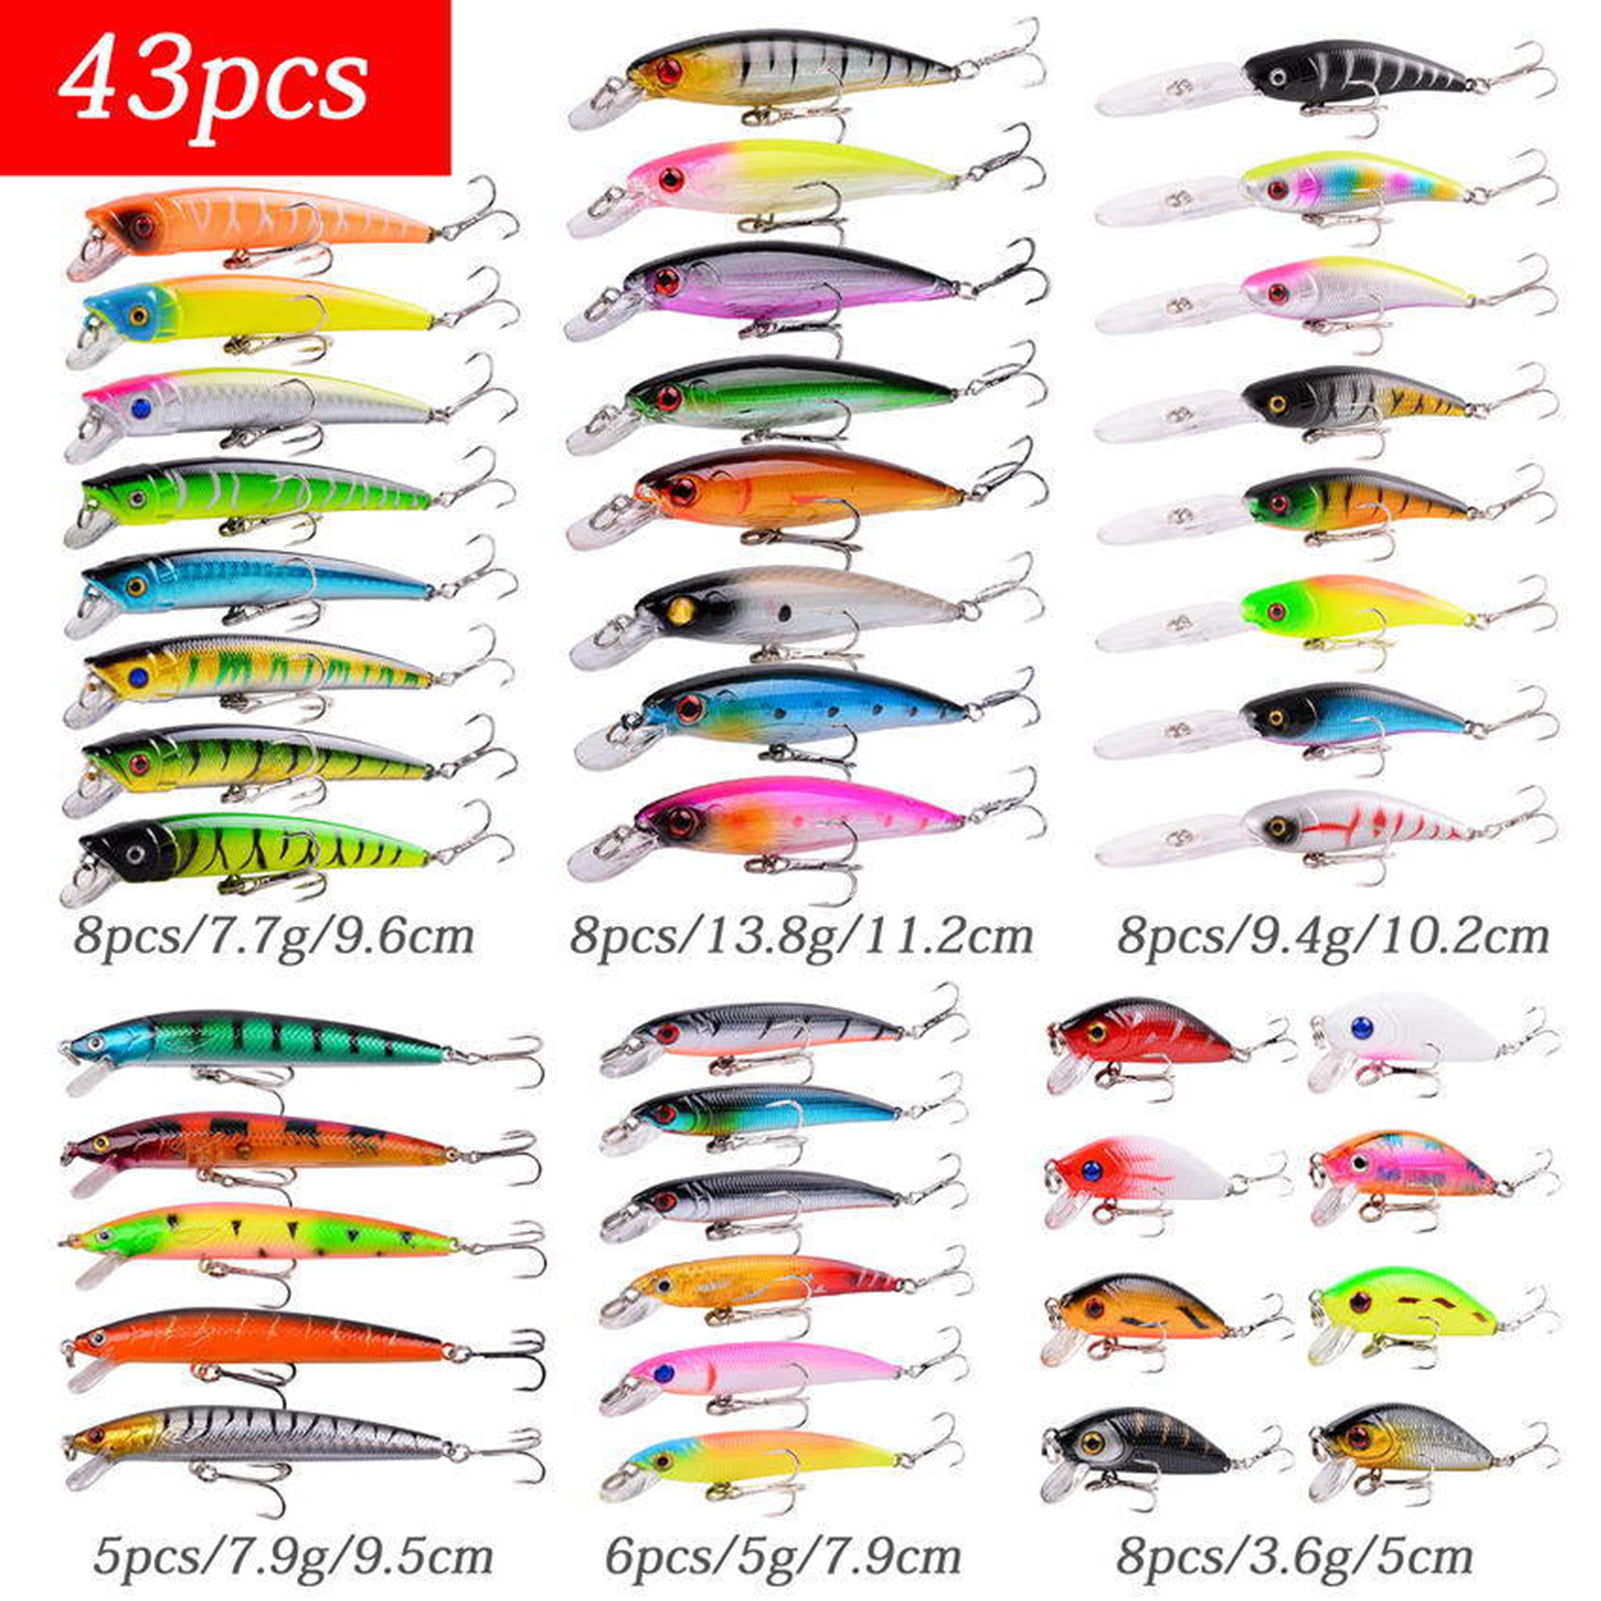 Details about   Lot Fishing Lures Minnow 9cm/6.6g Plastic Bass Hard Baits Fish Tackle Best 